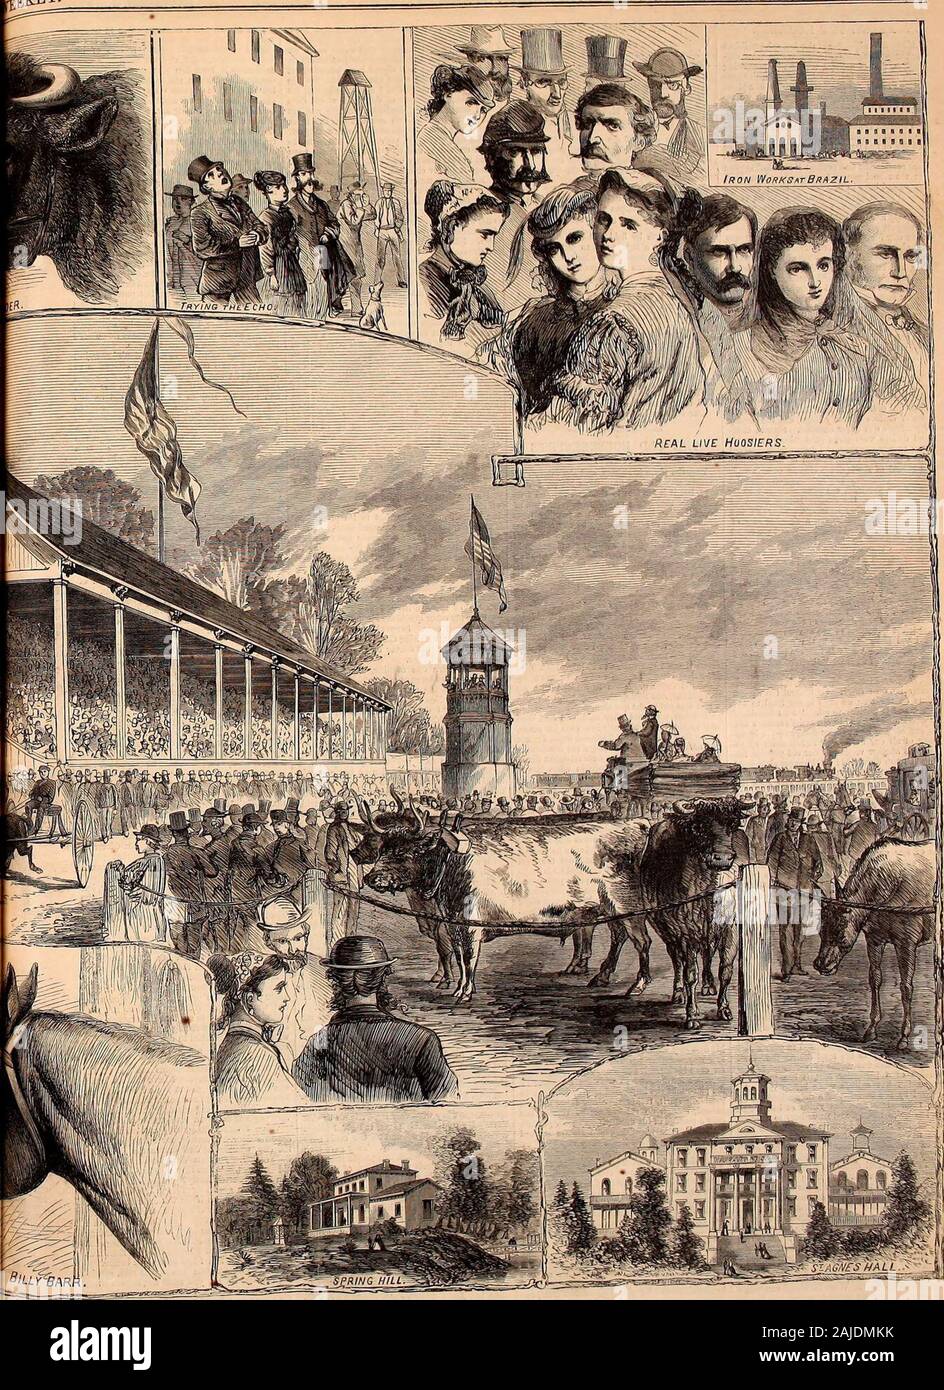 Harper's weekly . INDIANA STATE FAJB AT TEREE HAUTE, Octoder 1, 2, 3,. -AMONG THE HOOSIERS.-Sketched by J. F. Gooxrar— [See Page 098.] HARPERS WEEKLY. [November 2, 1867. AMONG THE 1IOOSIERS. IX XUTTlXf; TIME. woods we gniit, glints of gold nnd ?in.! I d mhoI lo -pe.itnn;-.iiid it more convenient (o tinUie than (]-.»here, :md so |,r|it:,g old concern. Tl.cn K..y . EQUILIBRIUM OF i ii - .-.h -..in. o!::! .h I.-i..w n ..way in .li-gust. H ally, could play the e;irs -ii One dnv ne came from Ibe oflico ihits. Who did wo think ho washerself. aptains spirit. Hy-the way. ilo. an.Uhun.eUTa ii&gt; ho ha Stock Photo